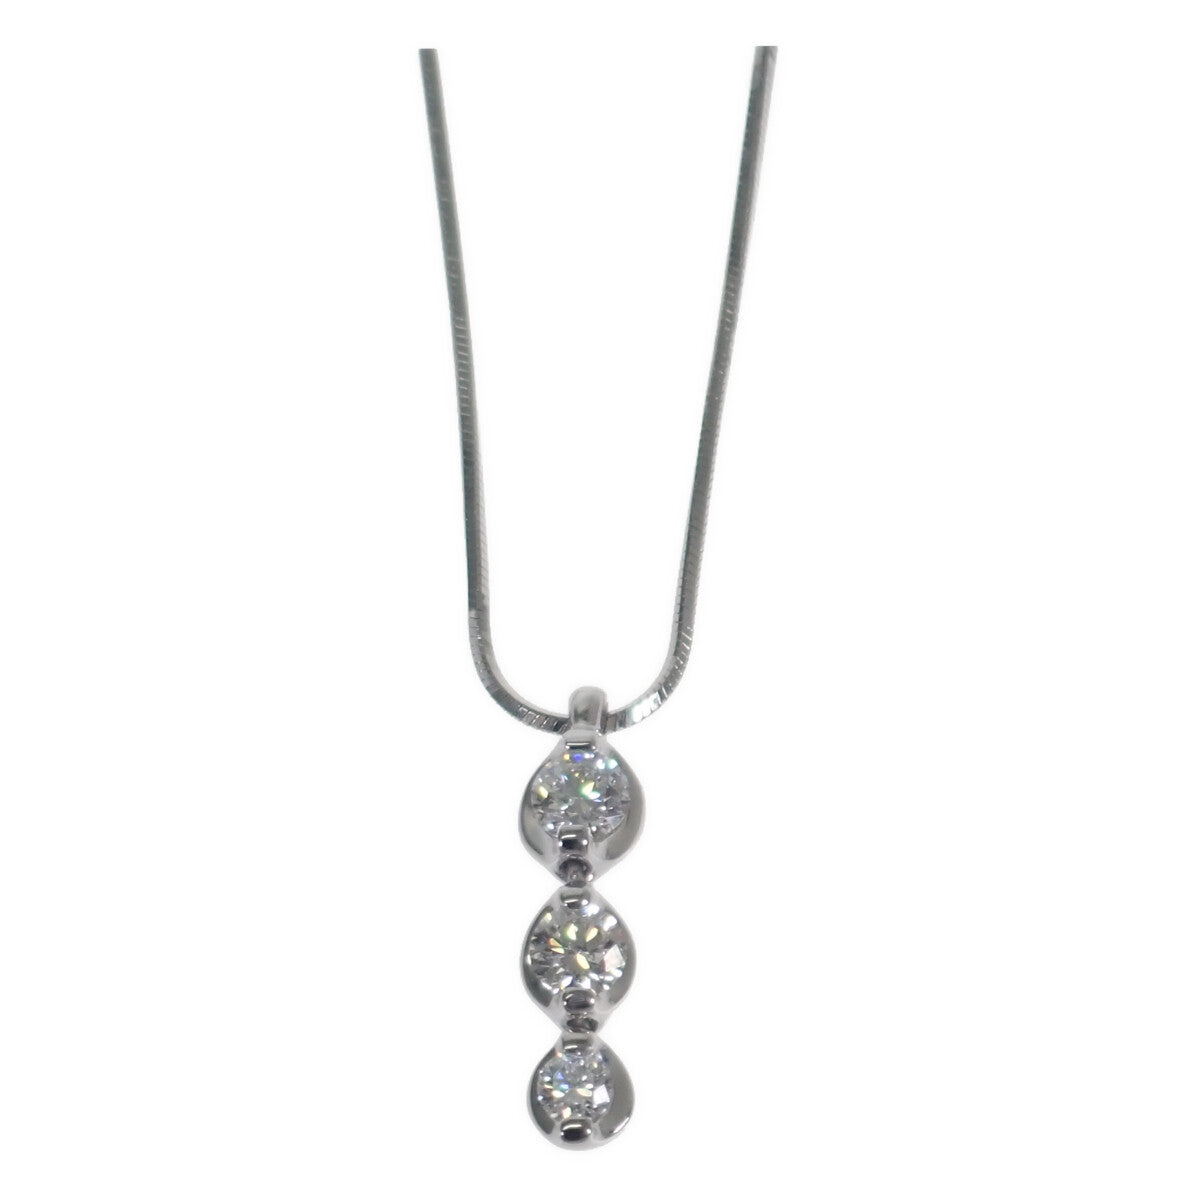 [LuxUness]  Platinum Pt850 and Pt900 Diamond Design Necklace with 0.30ct Diamond for Women in Excellent condition